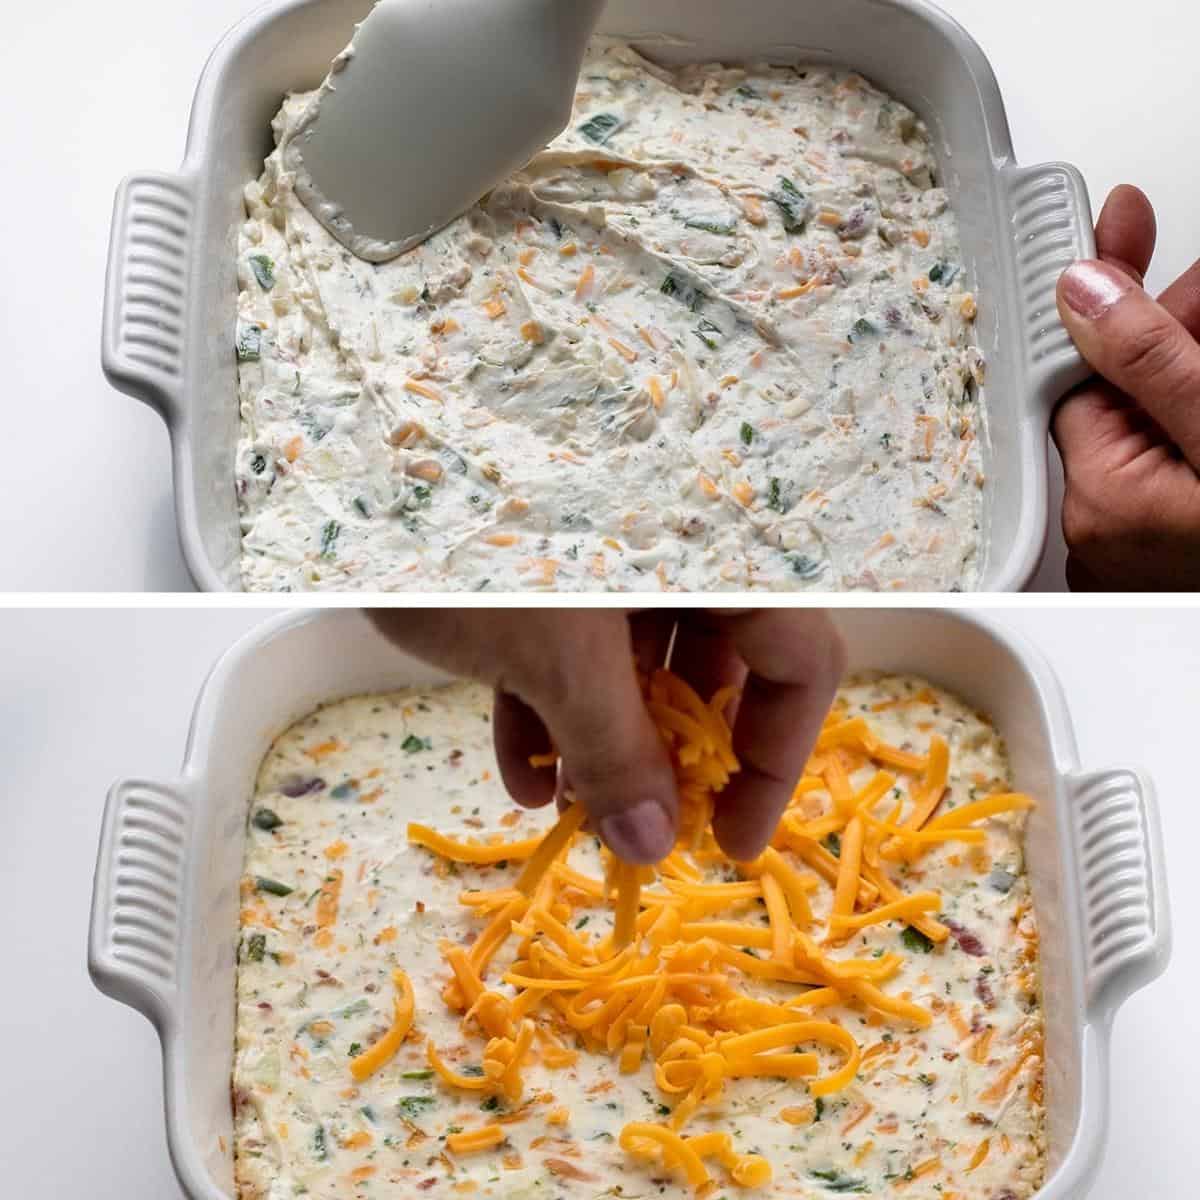 Spreading Jalapeno Popper Dip and then Topping with Cheese After Baking for a Bit